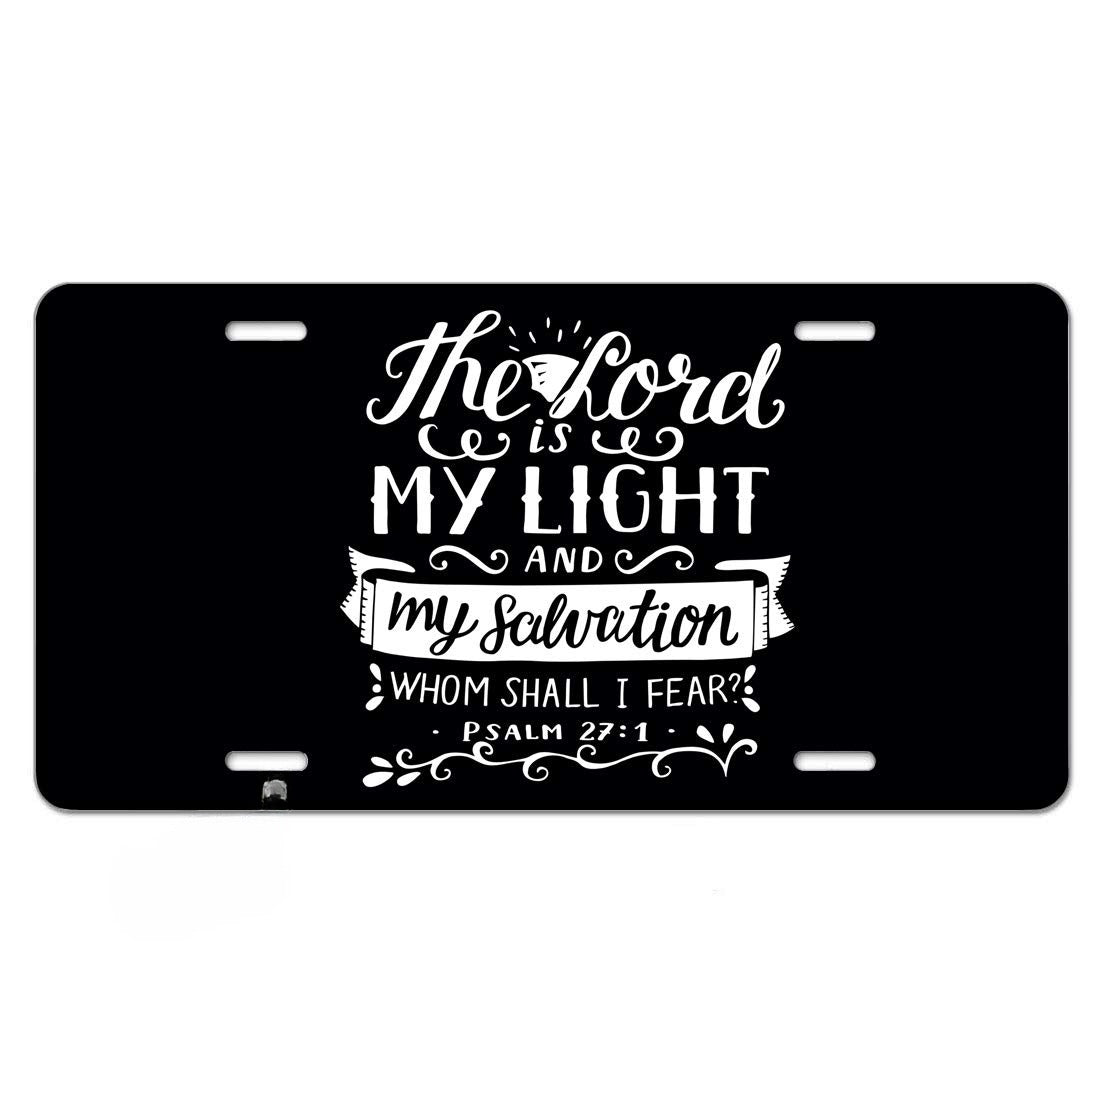 The Lord Is My Light And My Salvation Whom Shall I Fear Christian Front License Plate 6 X 12 In claimedbygoddesigns